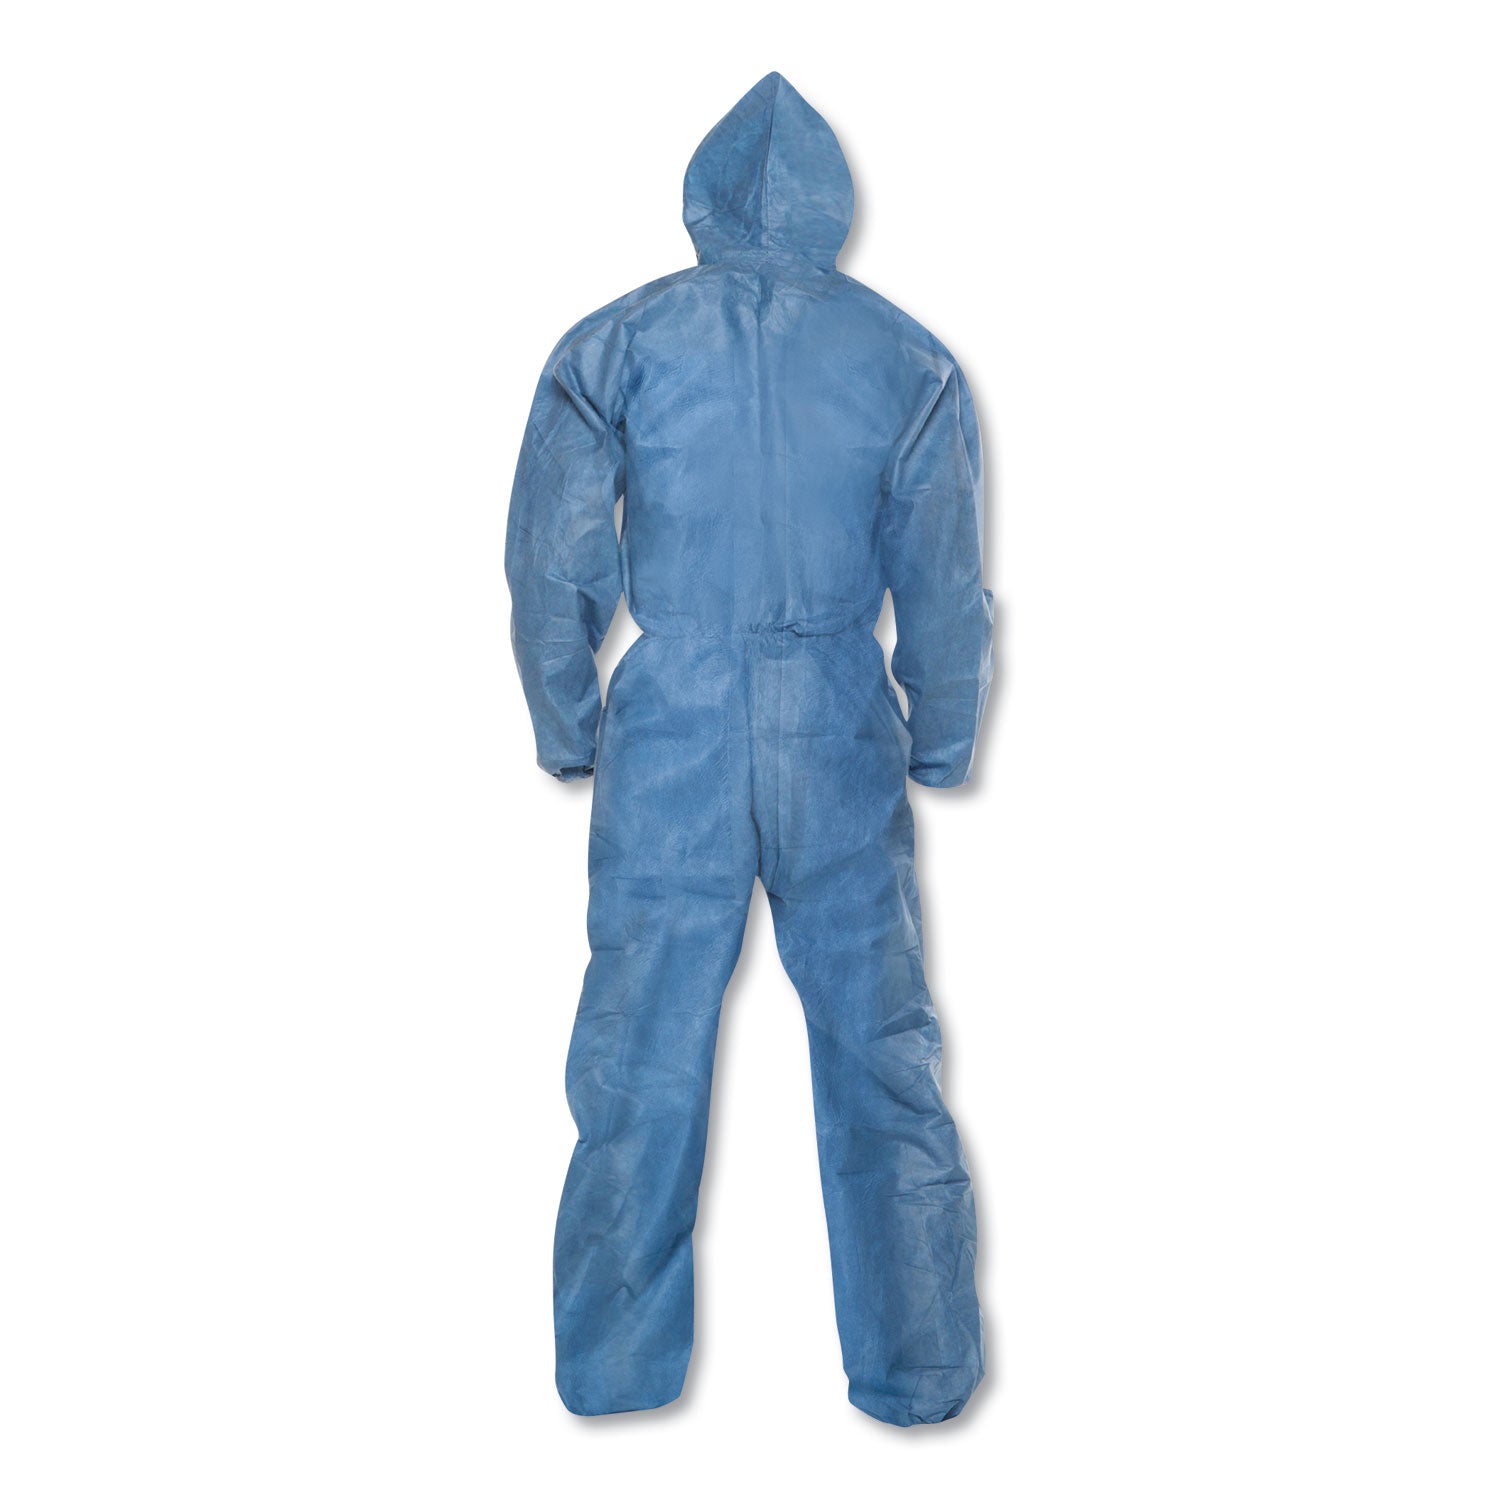 a20-elastic-back-wrist-ankle-hooded-coveralls-large-blue-24-carton_kcc58513 - 6